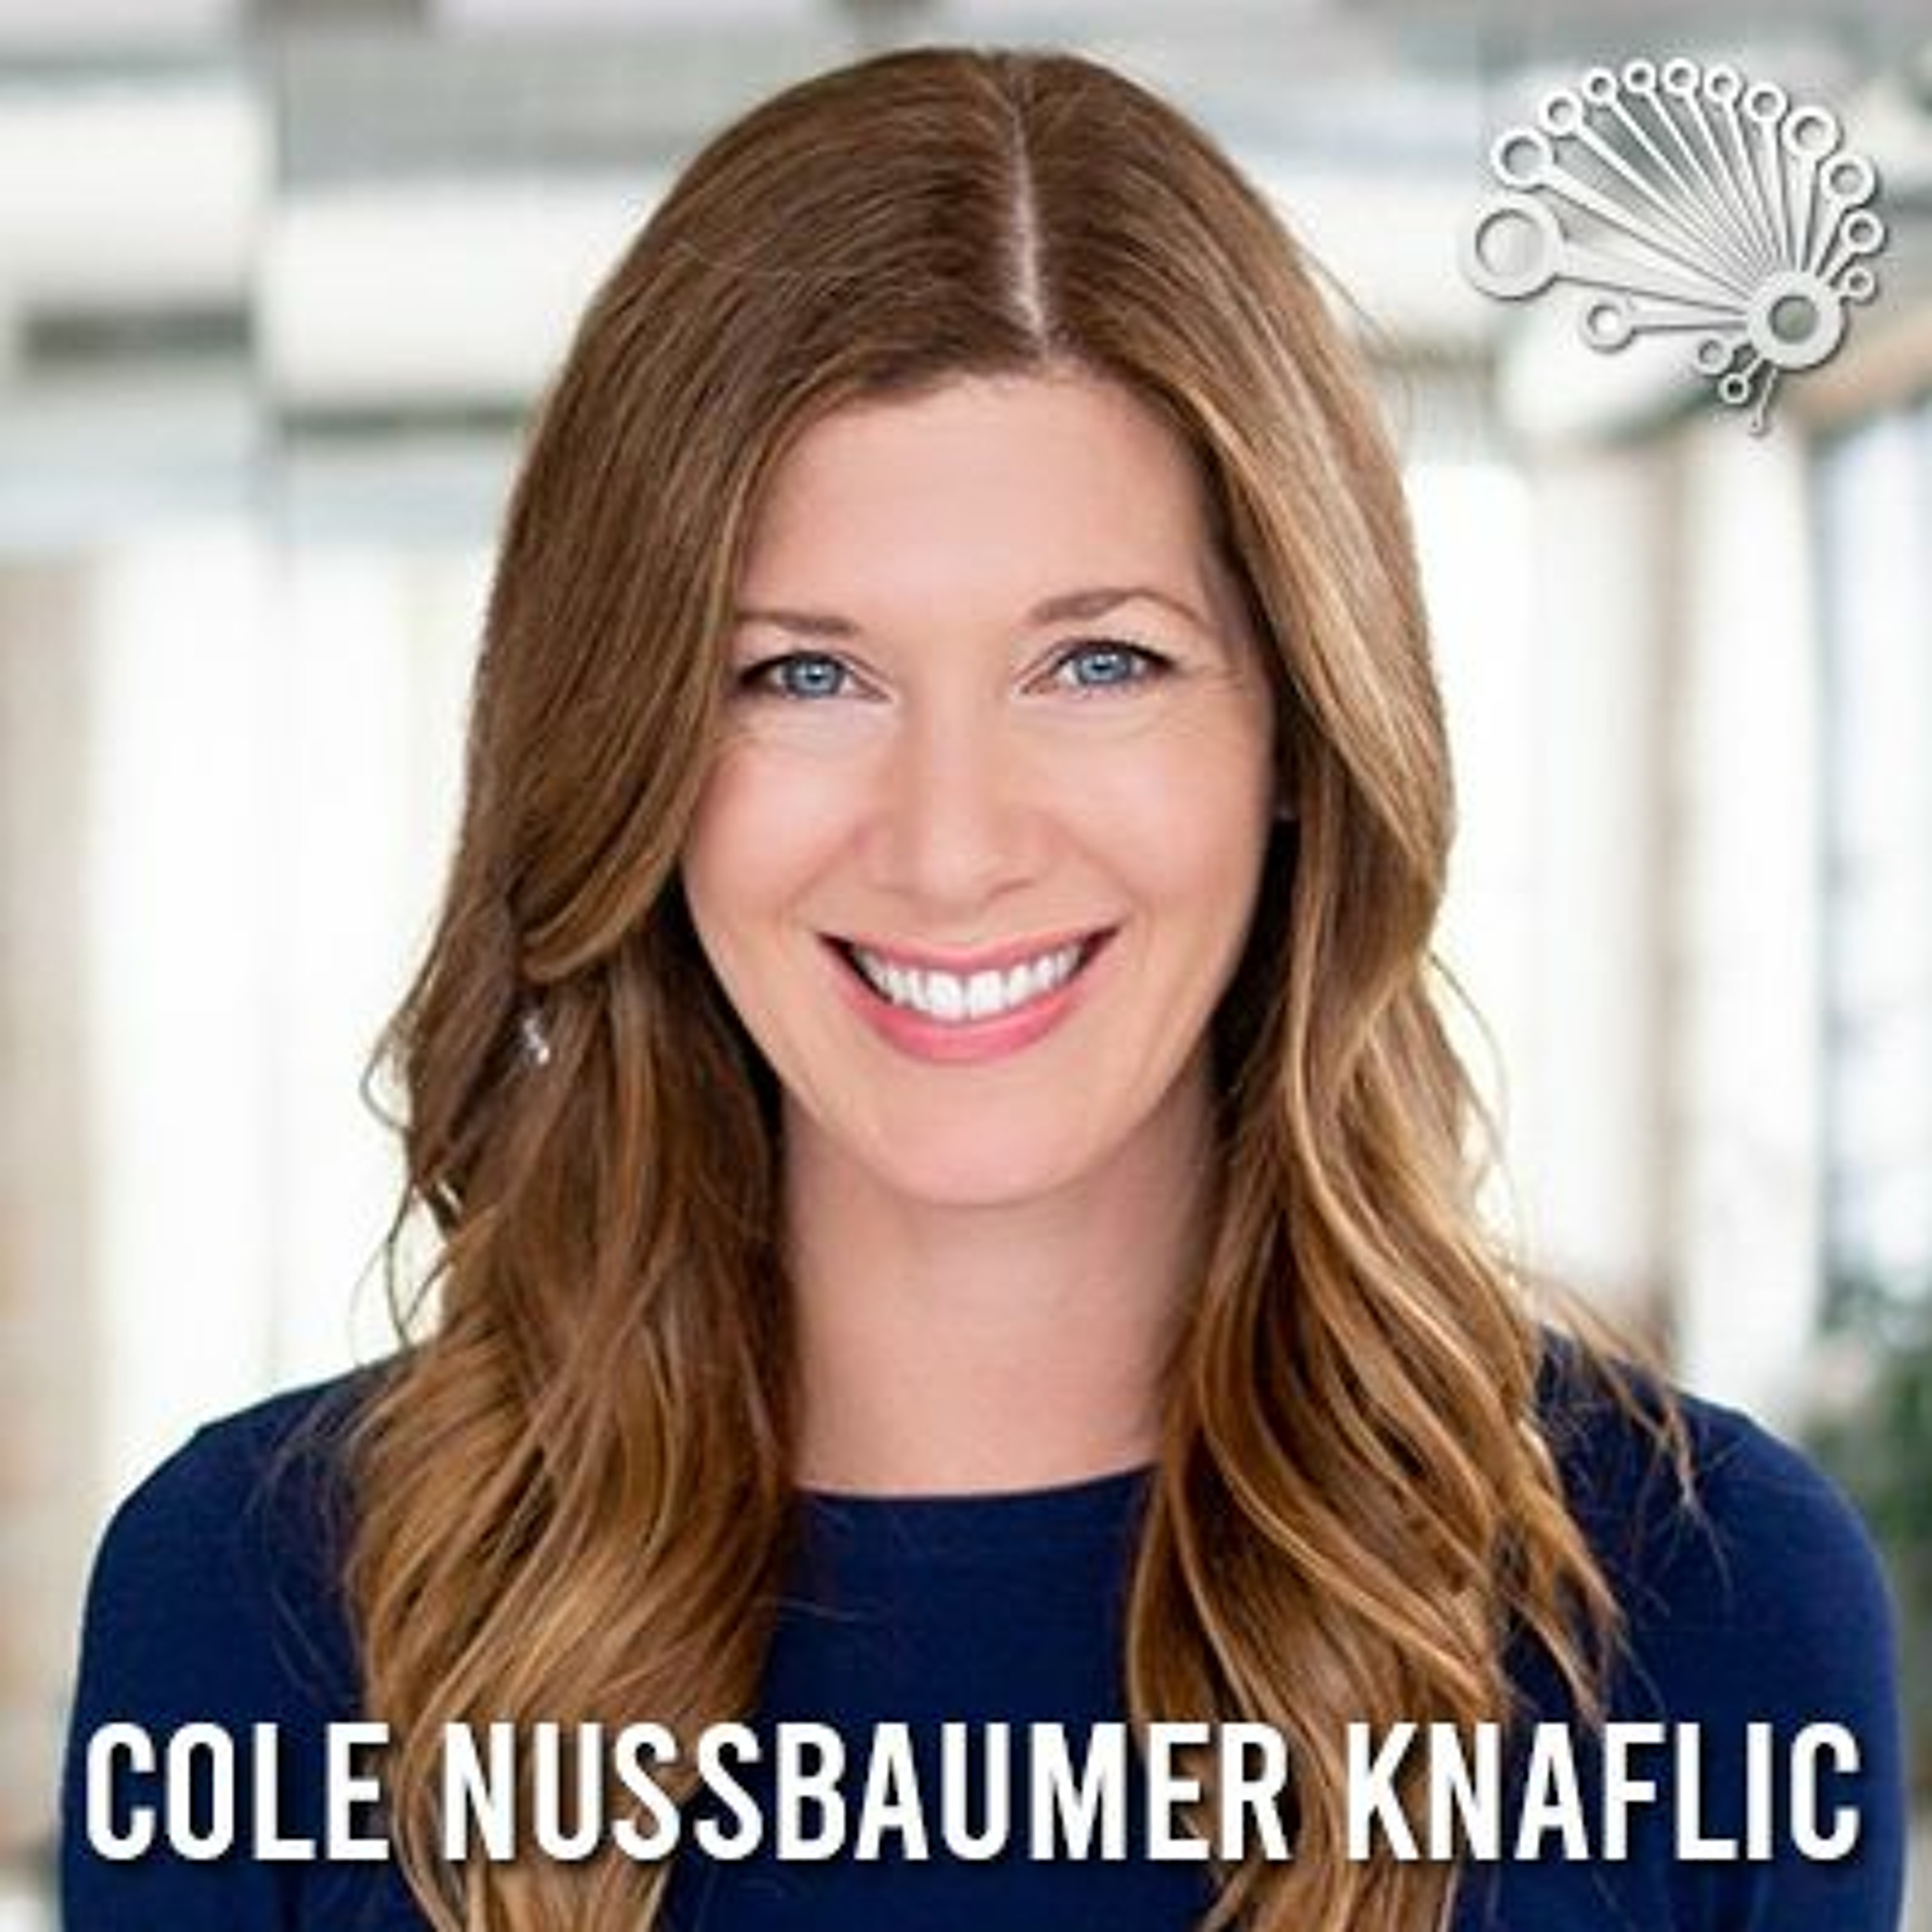 757: How to Speak so You Blow Listeners’ Minds, with Cole Nussbaumer Knaflic